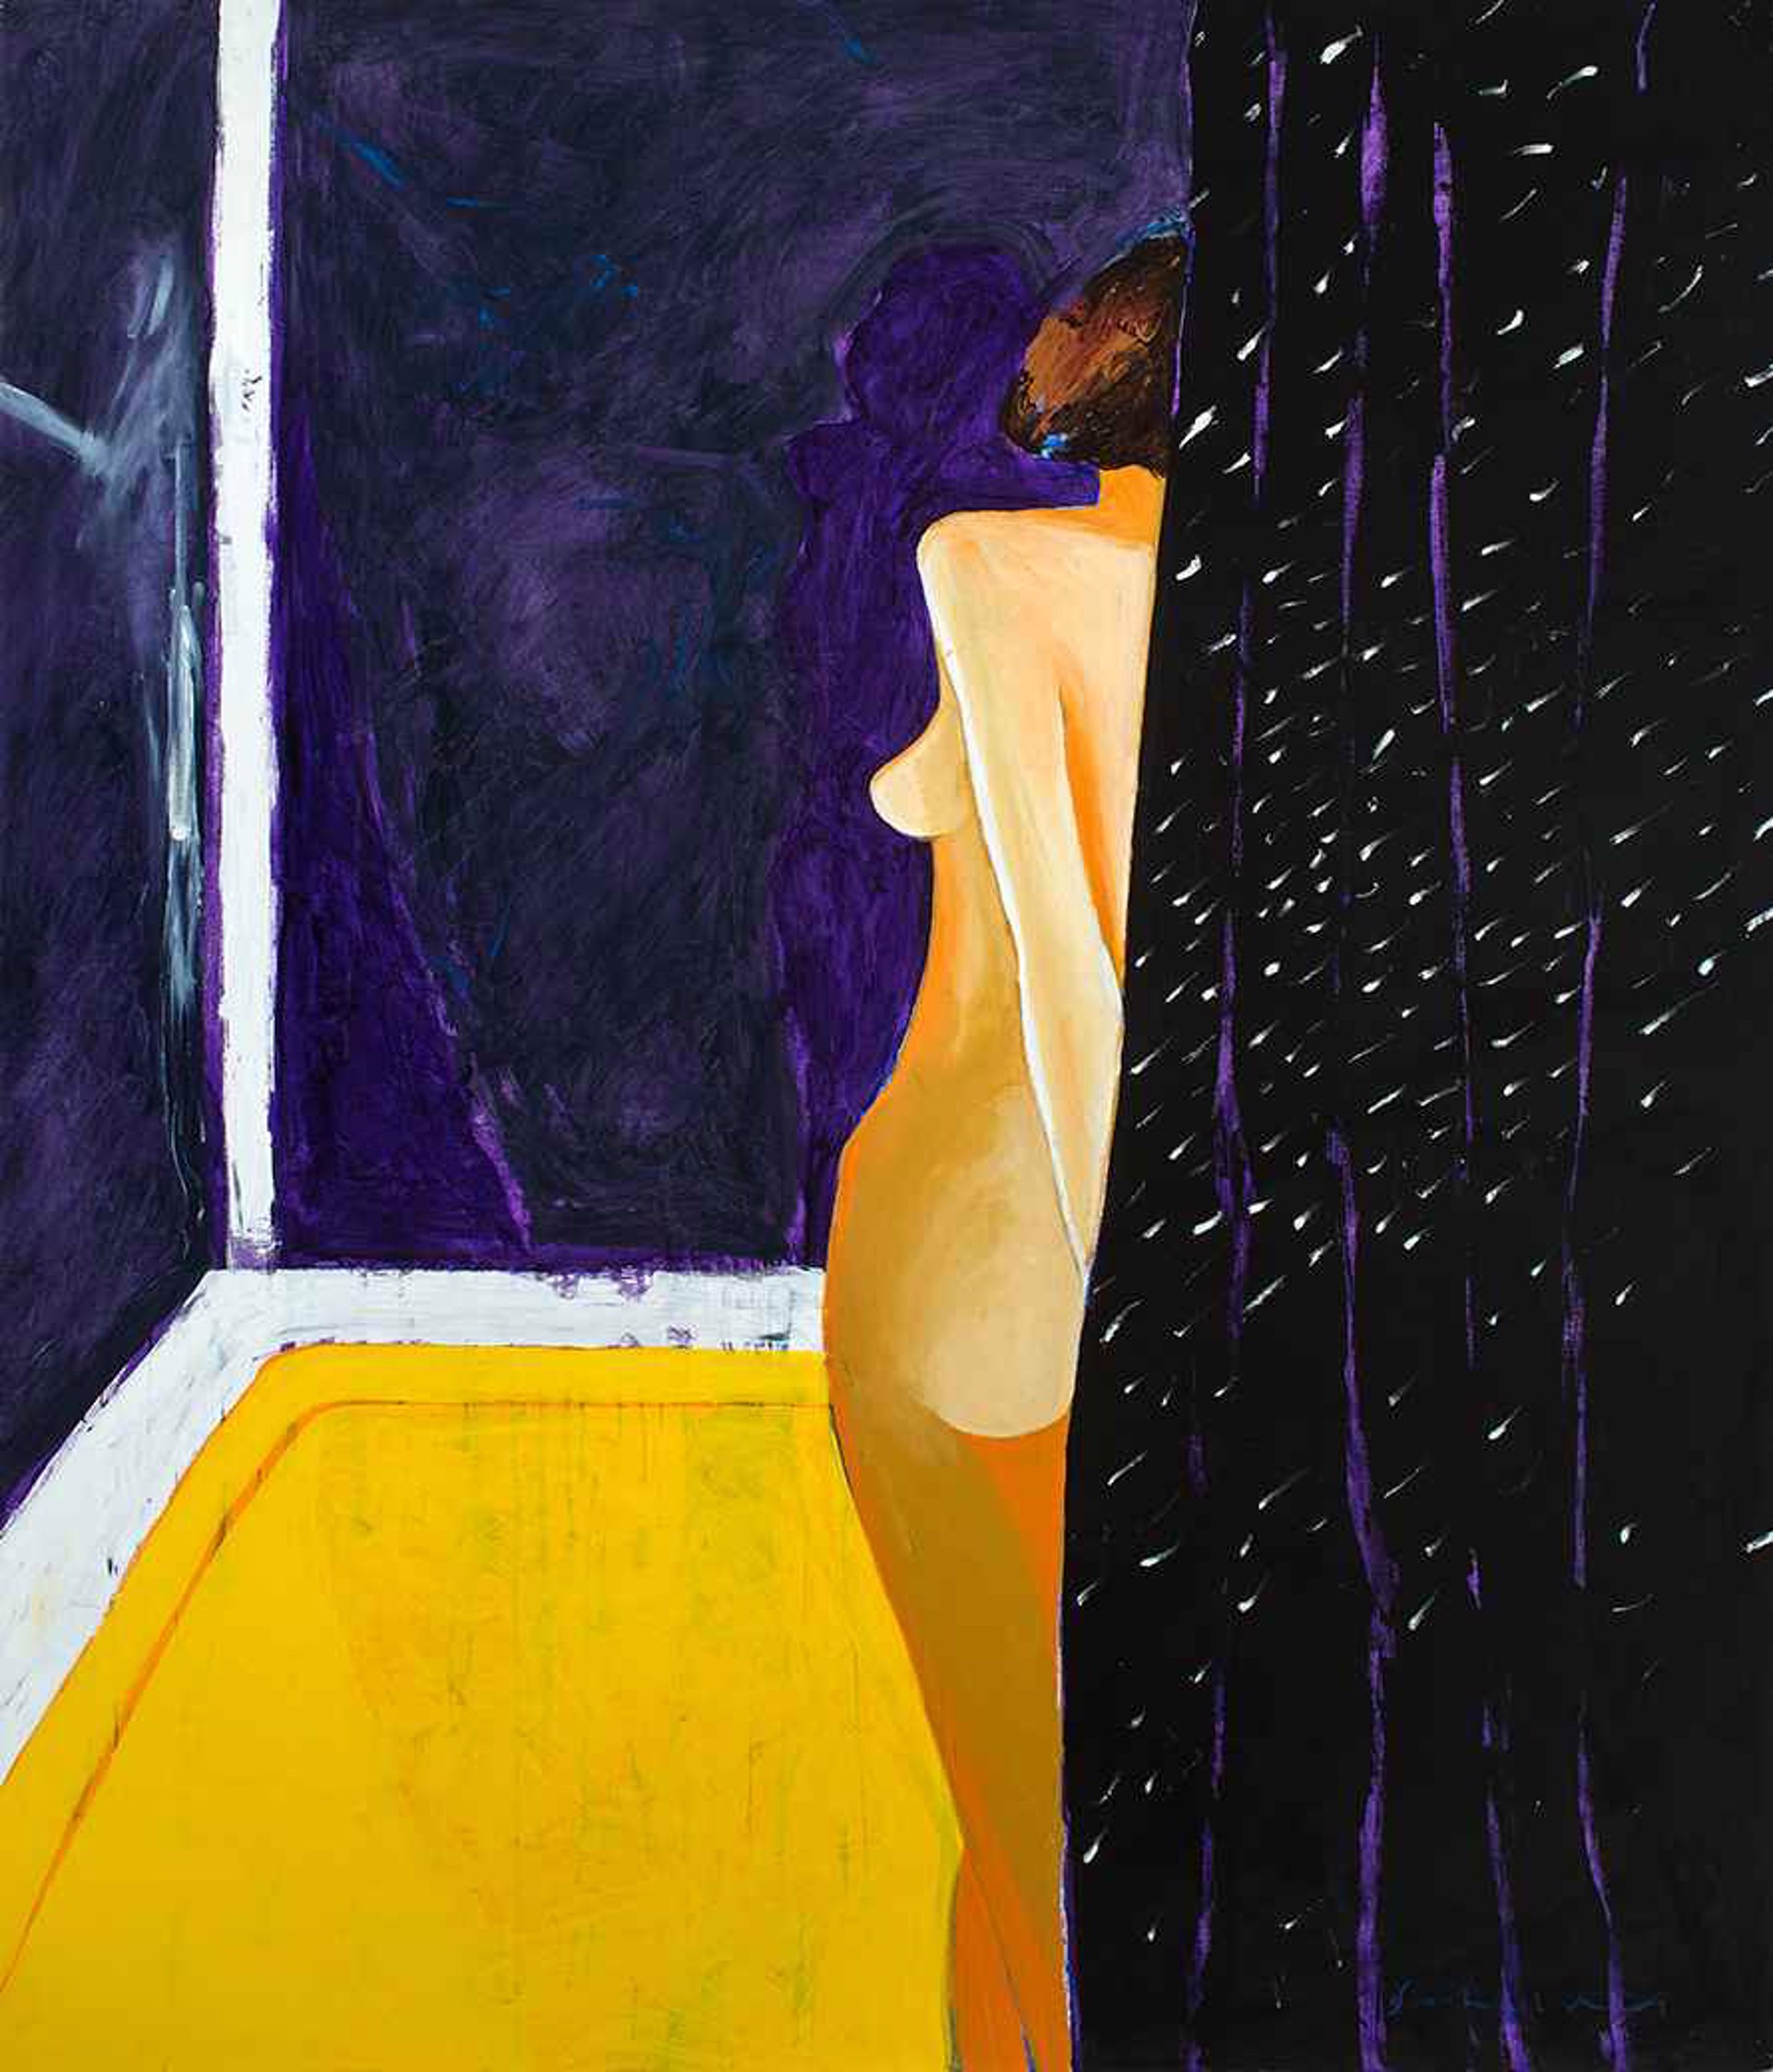 Mystery Woman and Yellow Bathtub by Fritz Scholder